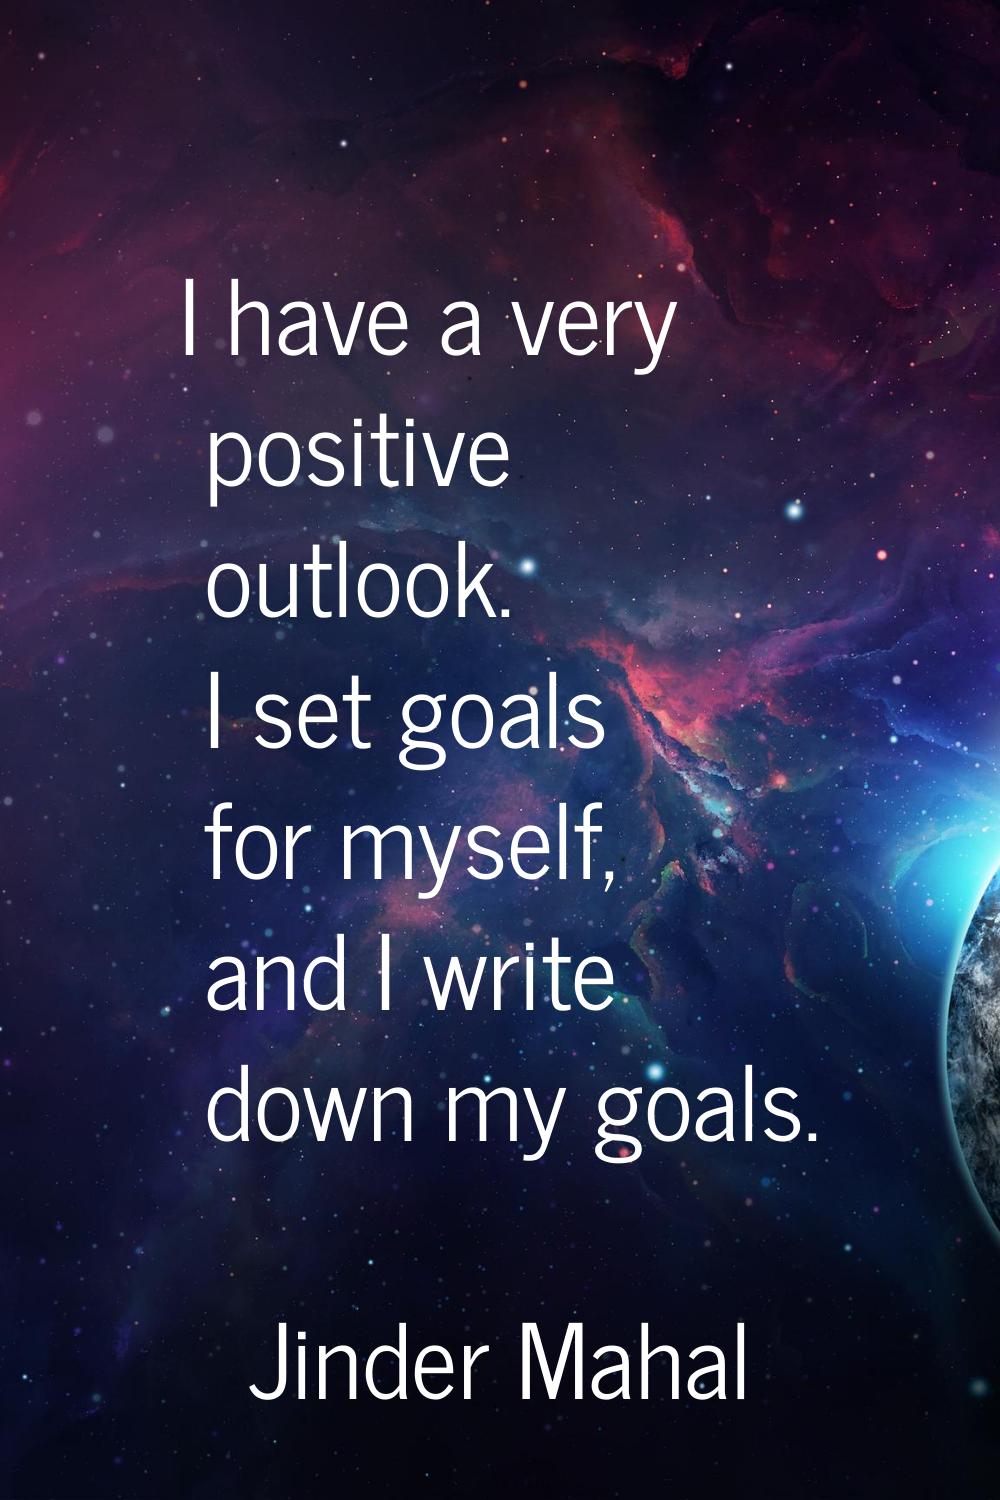 I have a very positive outlook. I set goals for myself, and I write down my goals.